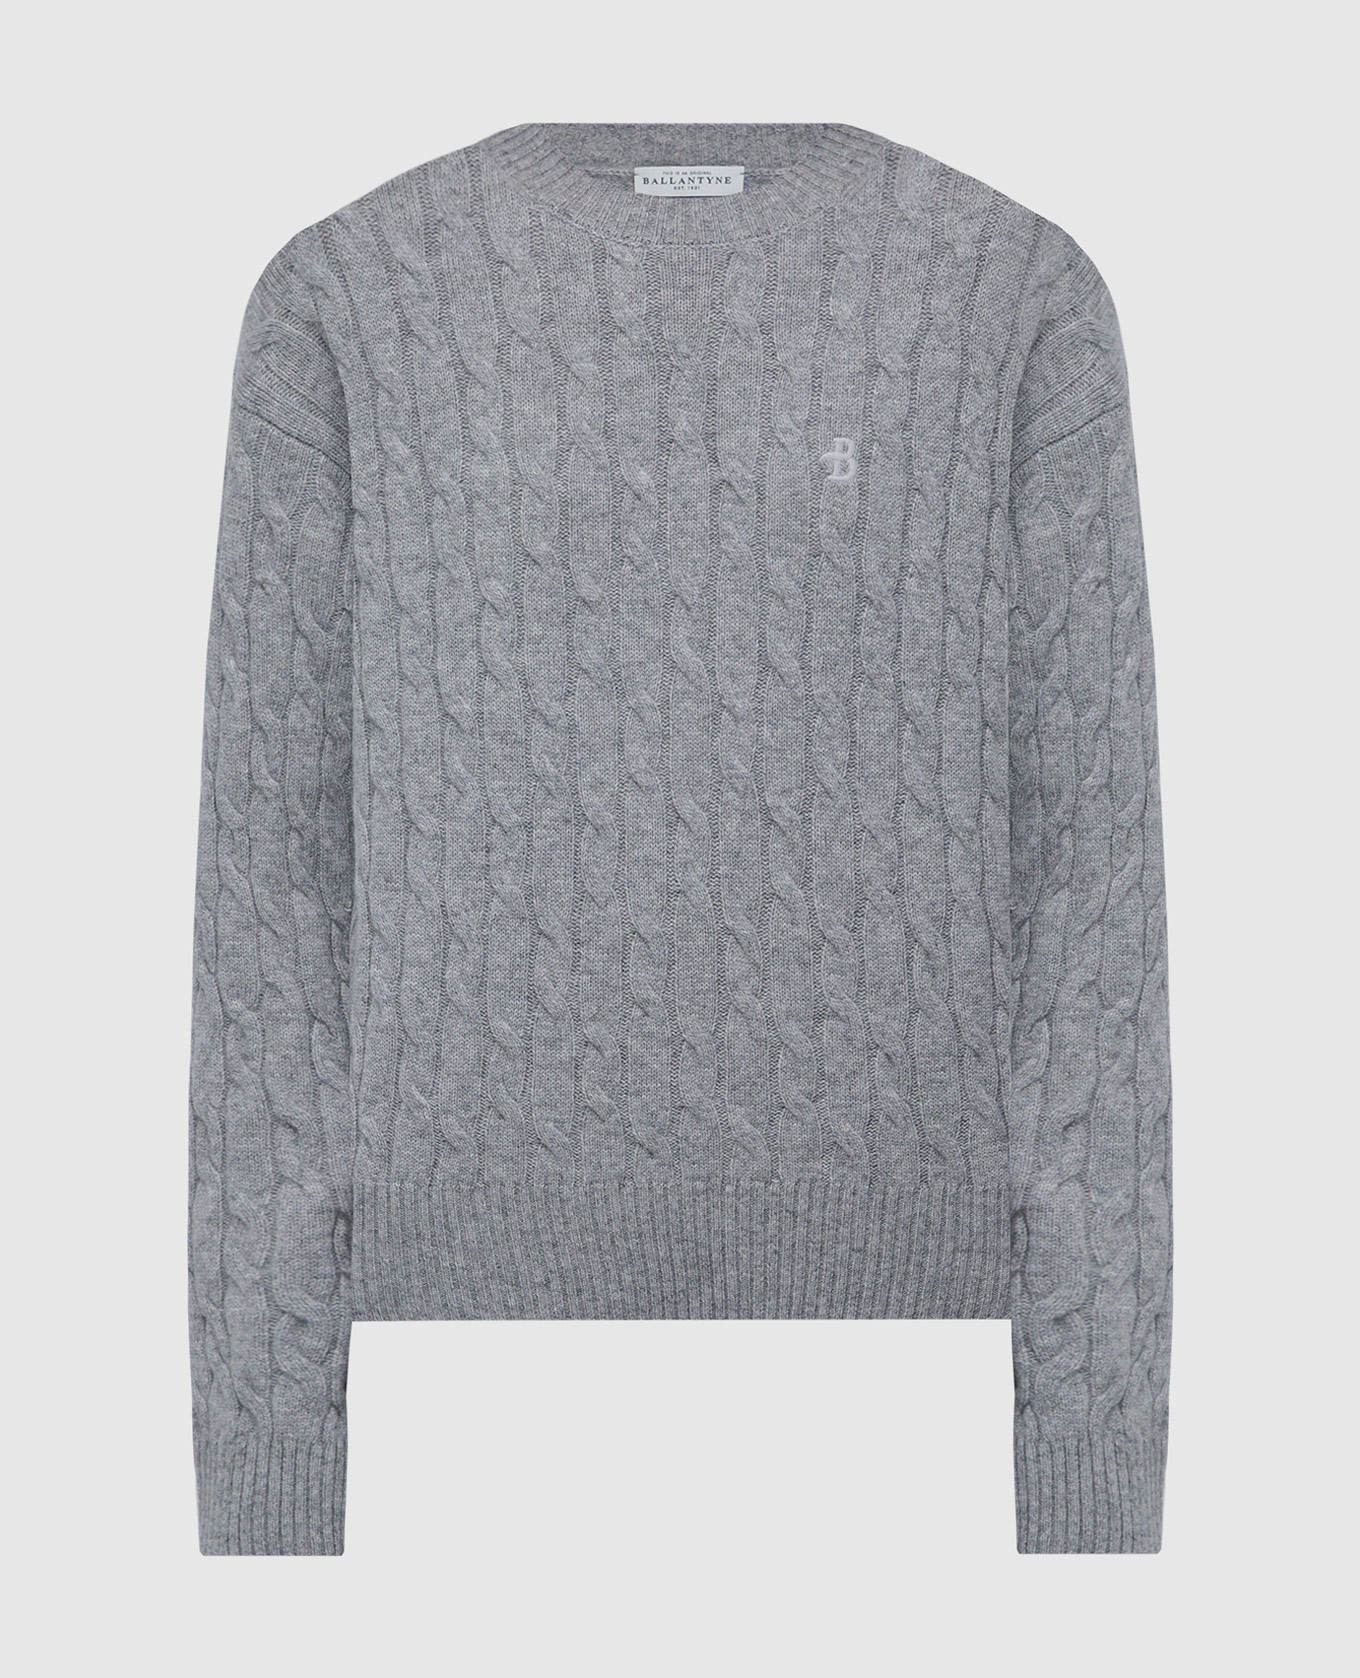 Gray sweater made of wool in a textured pattern